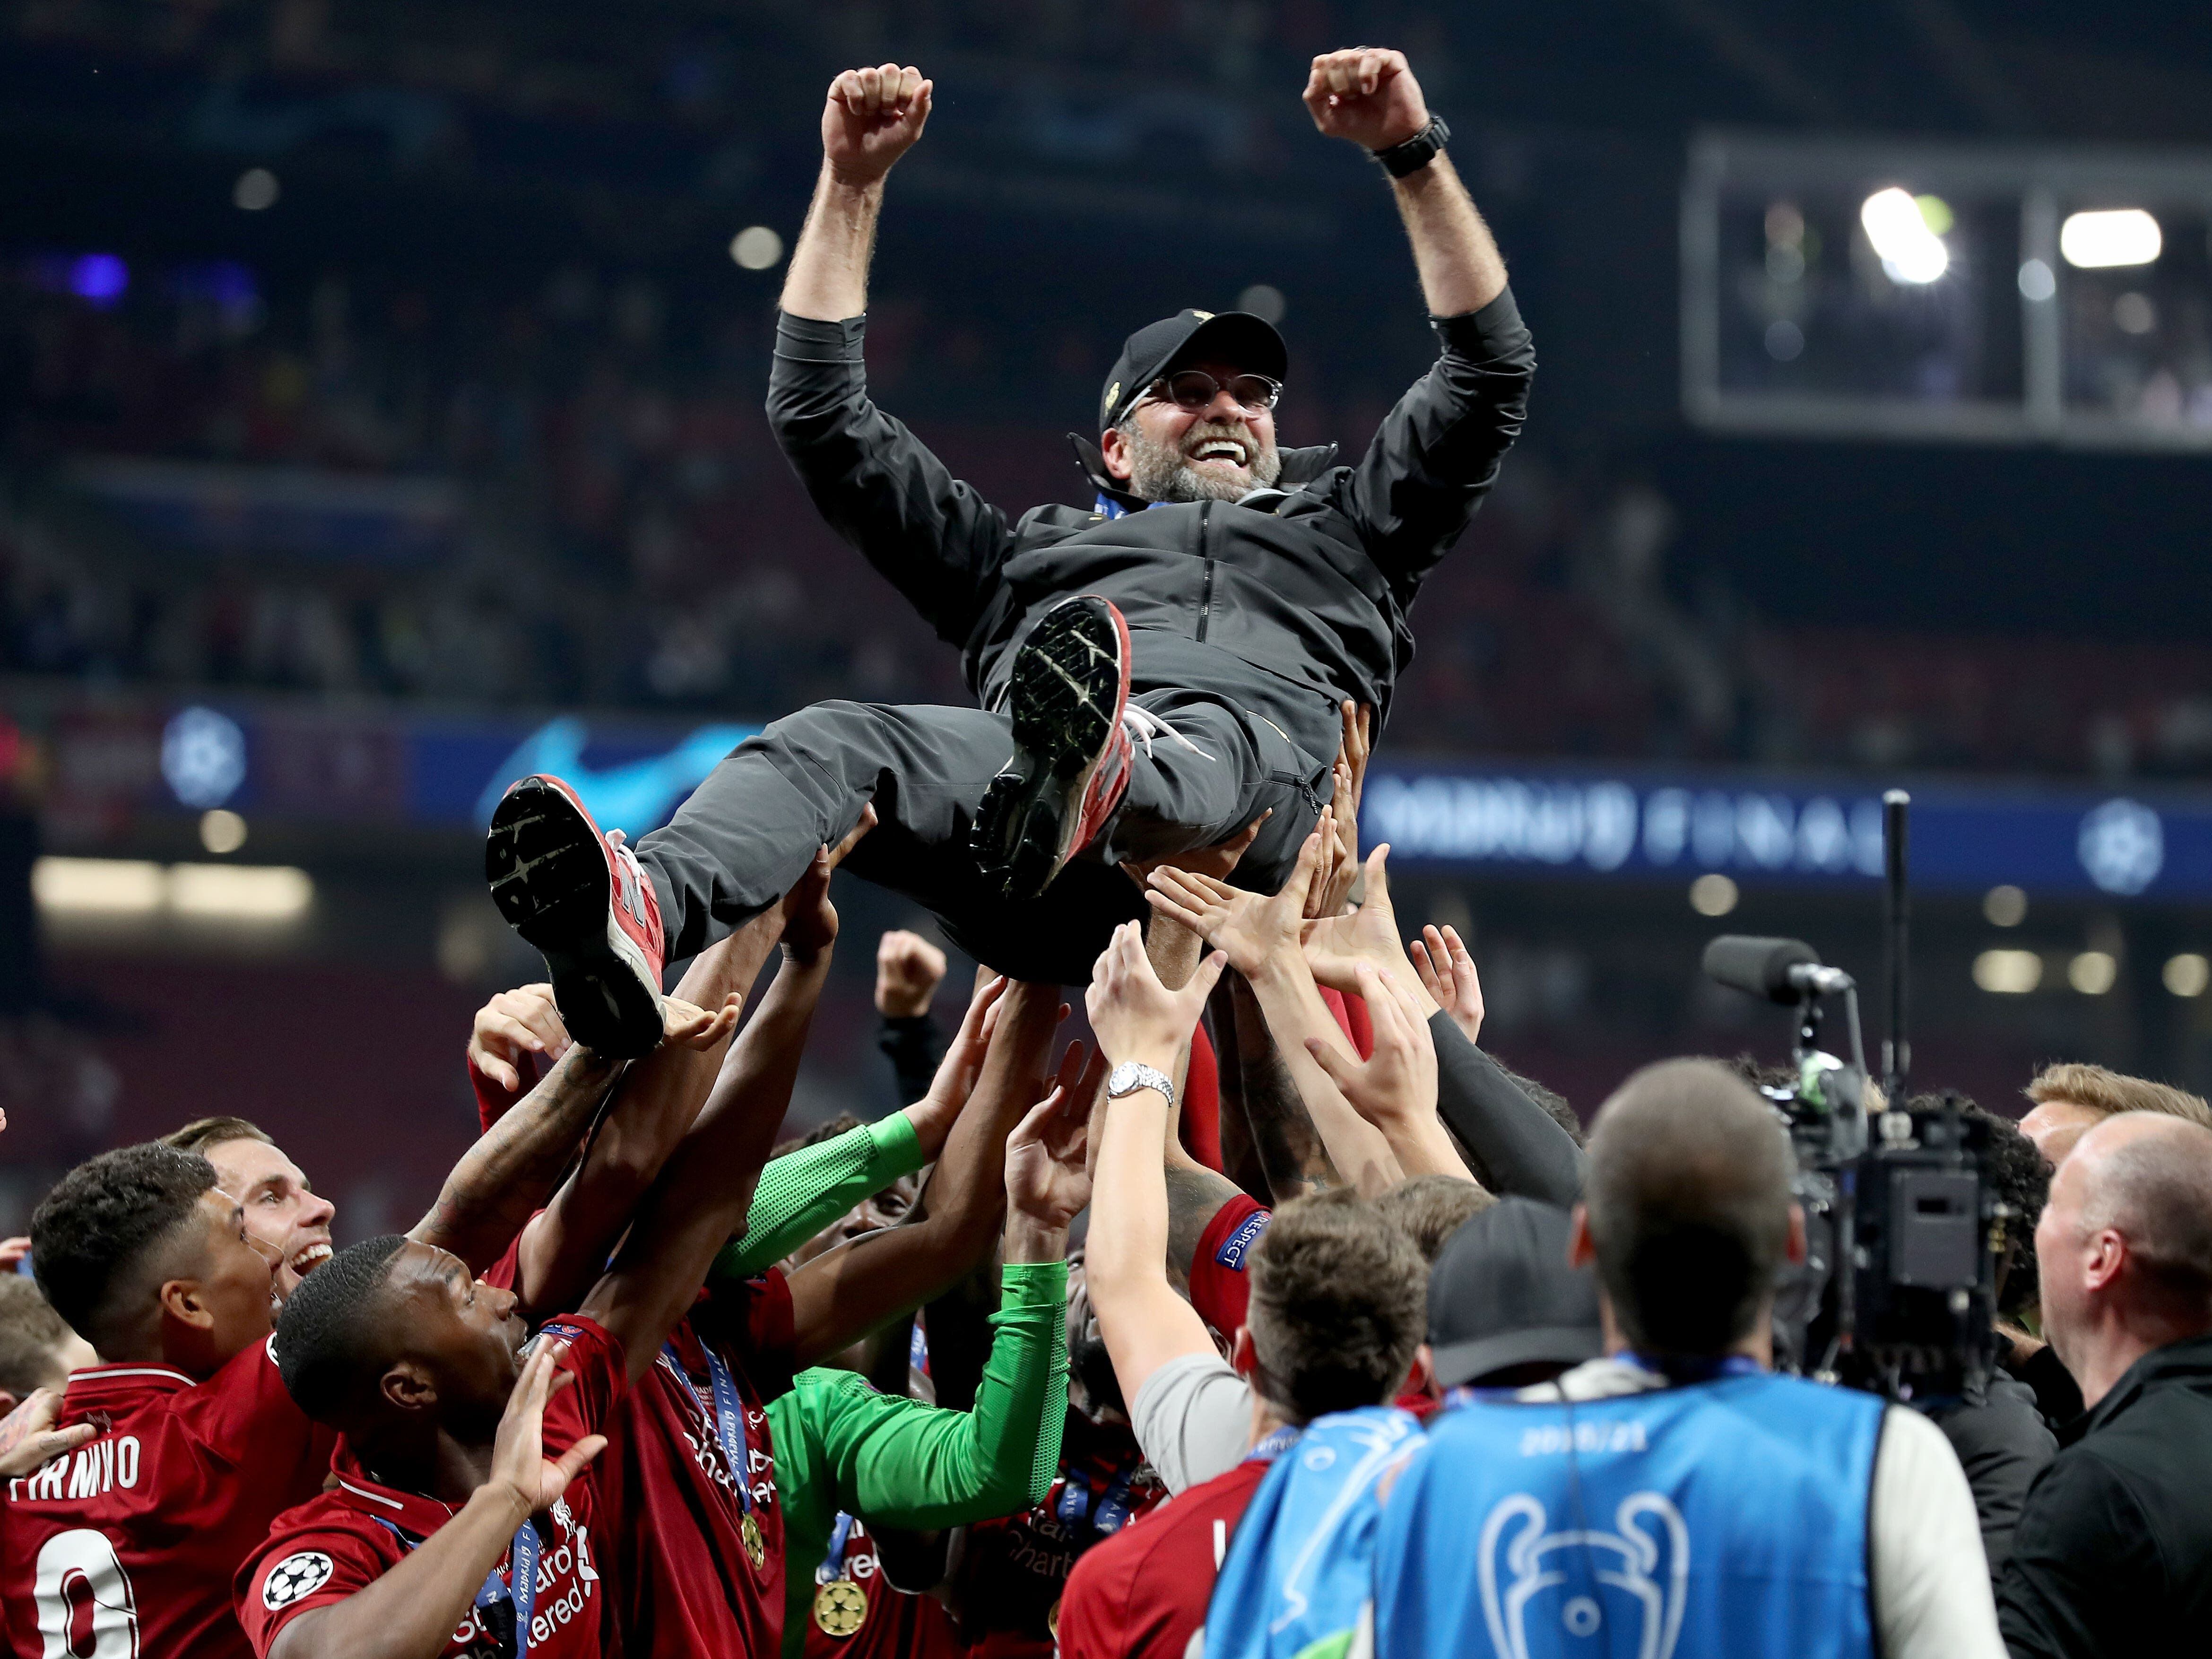 In pictures: Jurgen Klopp’s reign as Liverpool manager